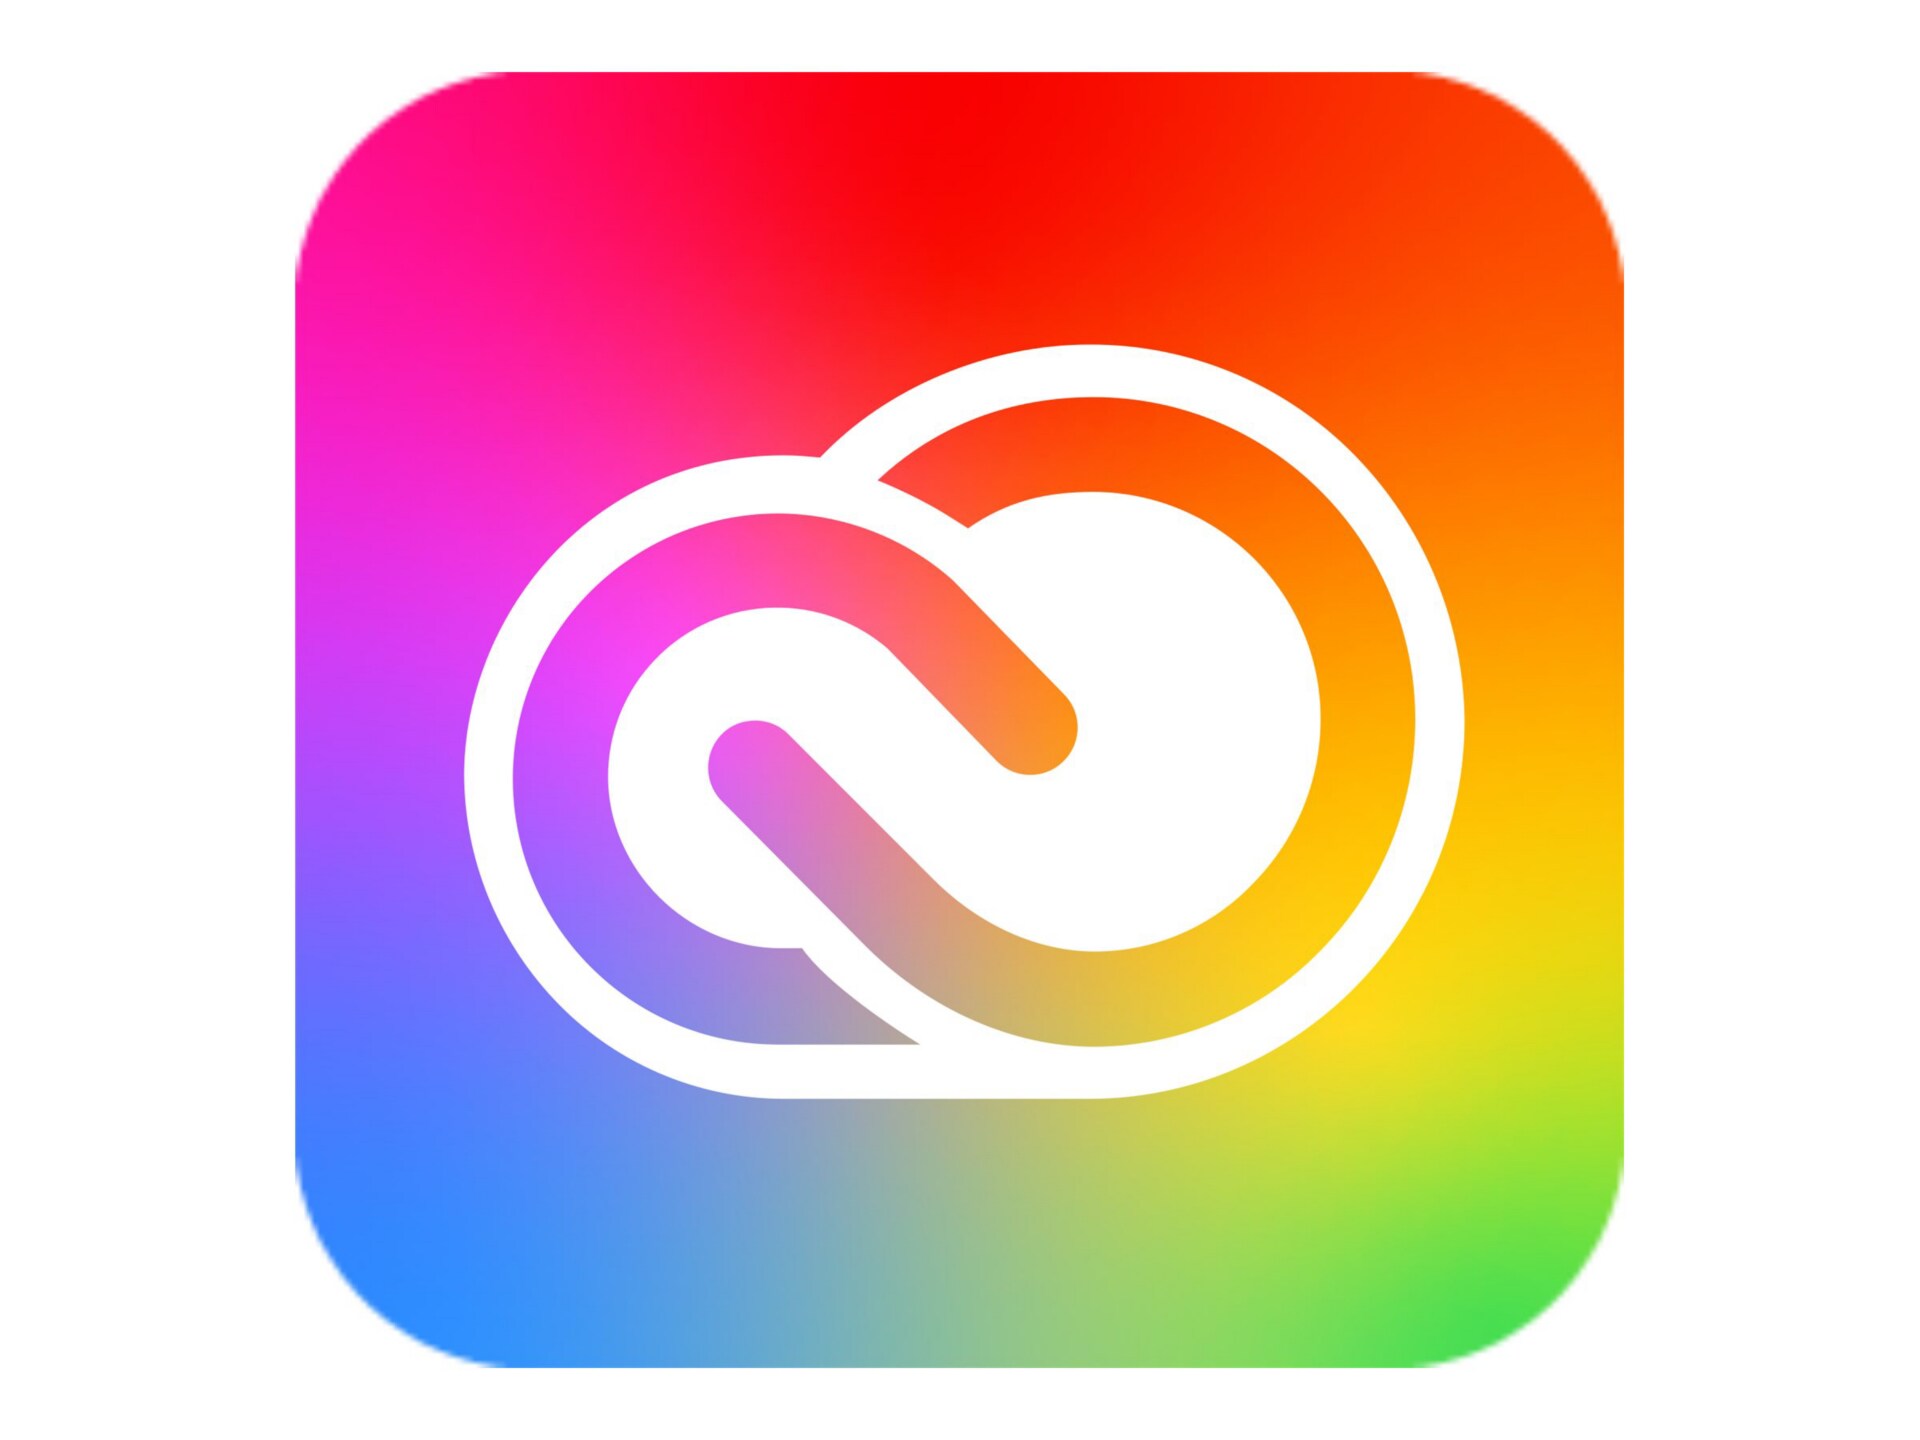 Adobe Creative Cloud for Enterprise - All Apps - Subscription New (3 months